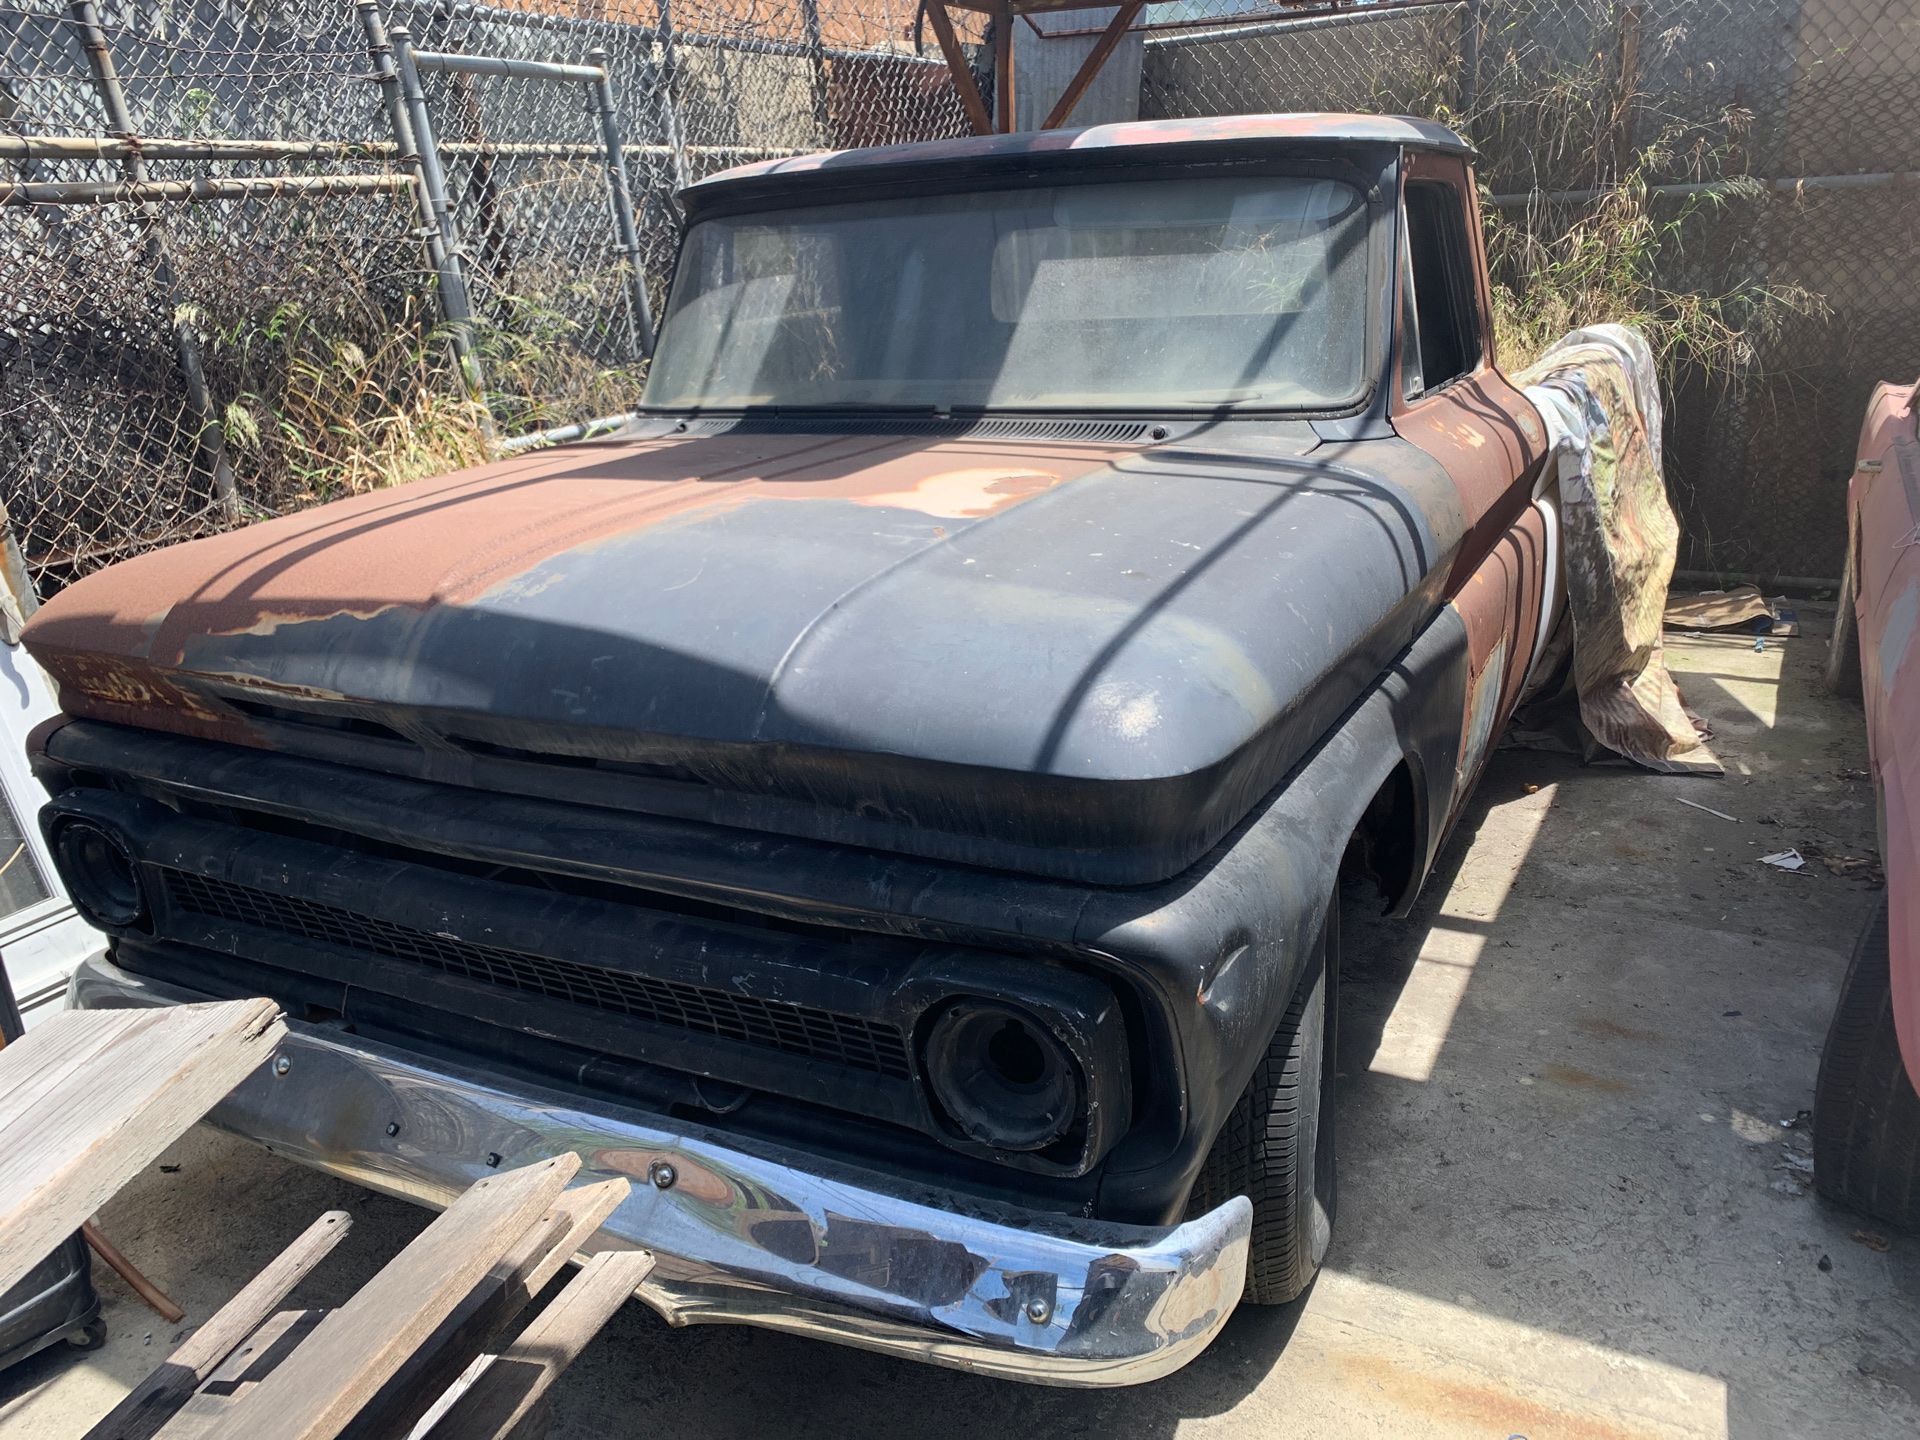 66 Chevy long bead parting out